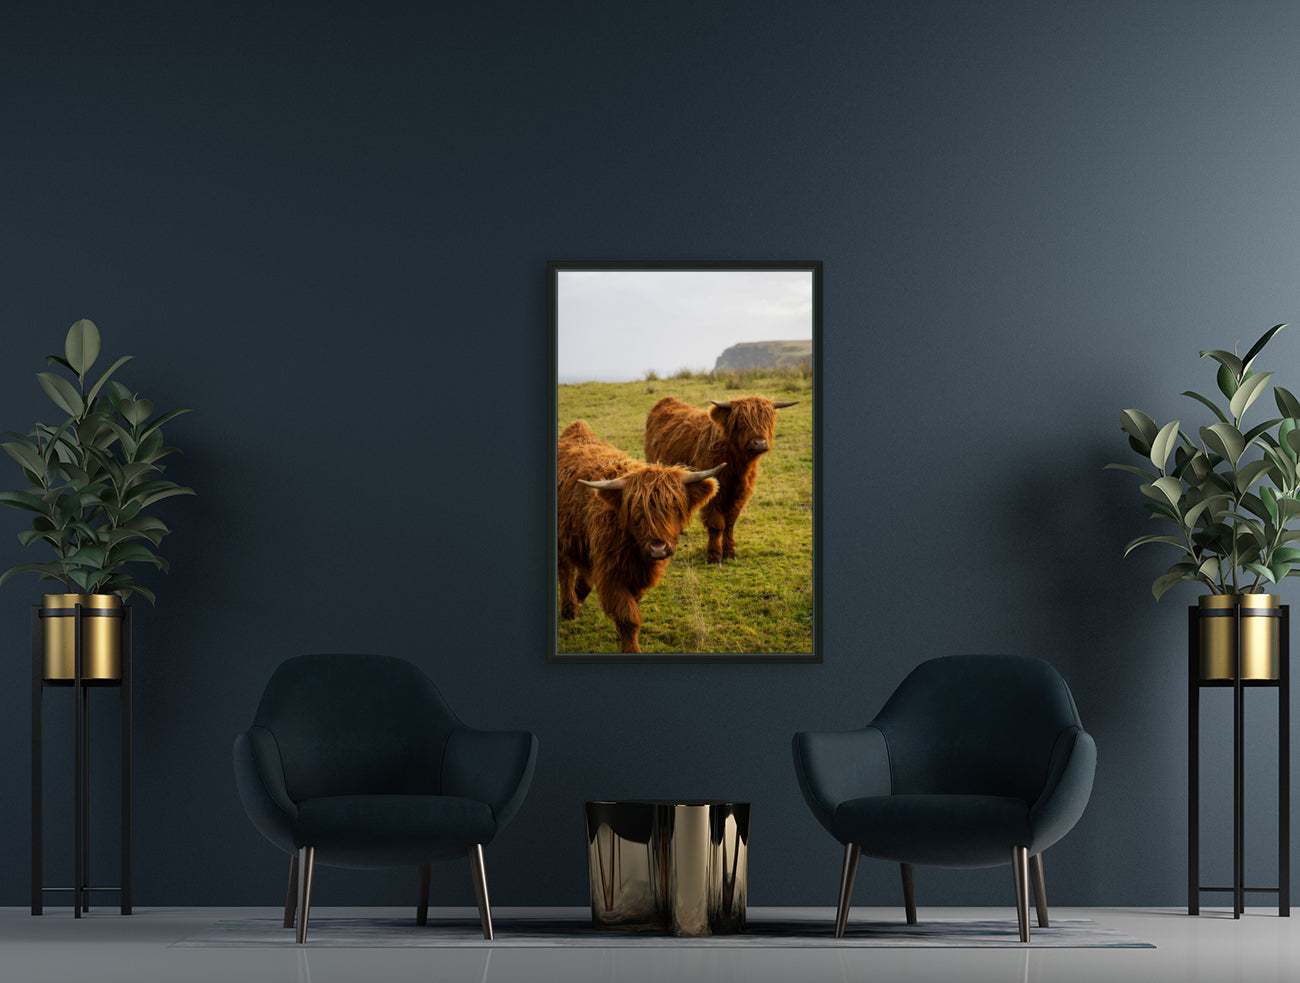 Highland Cows in Melvich Limited Time Promotion